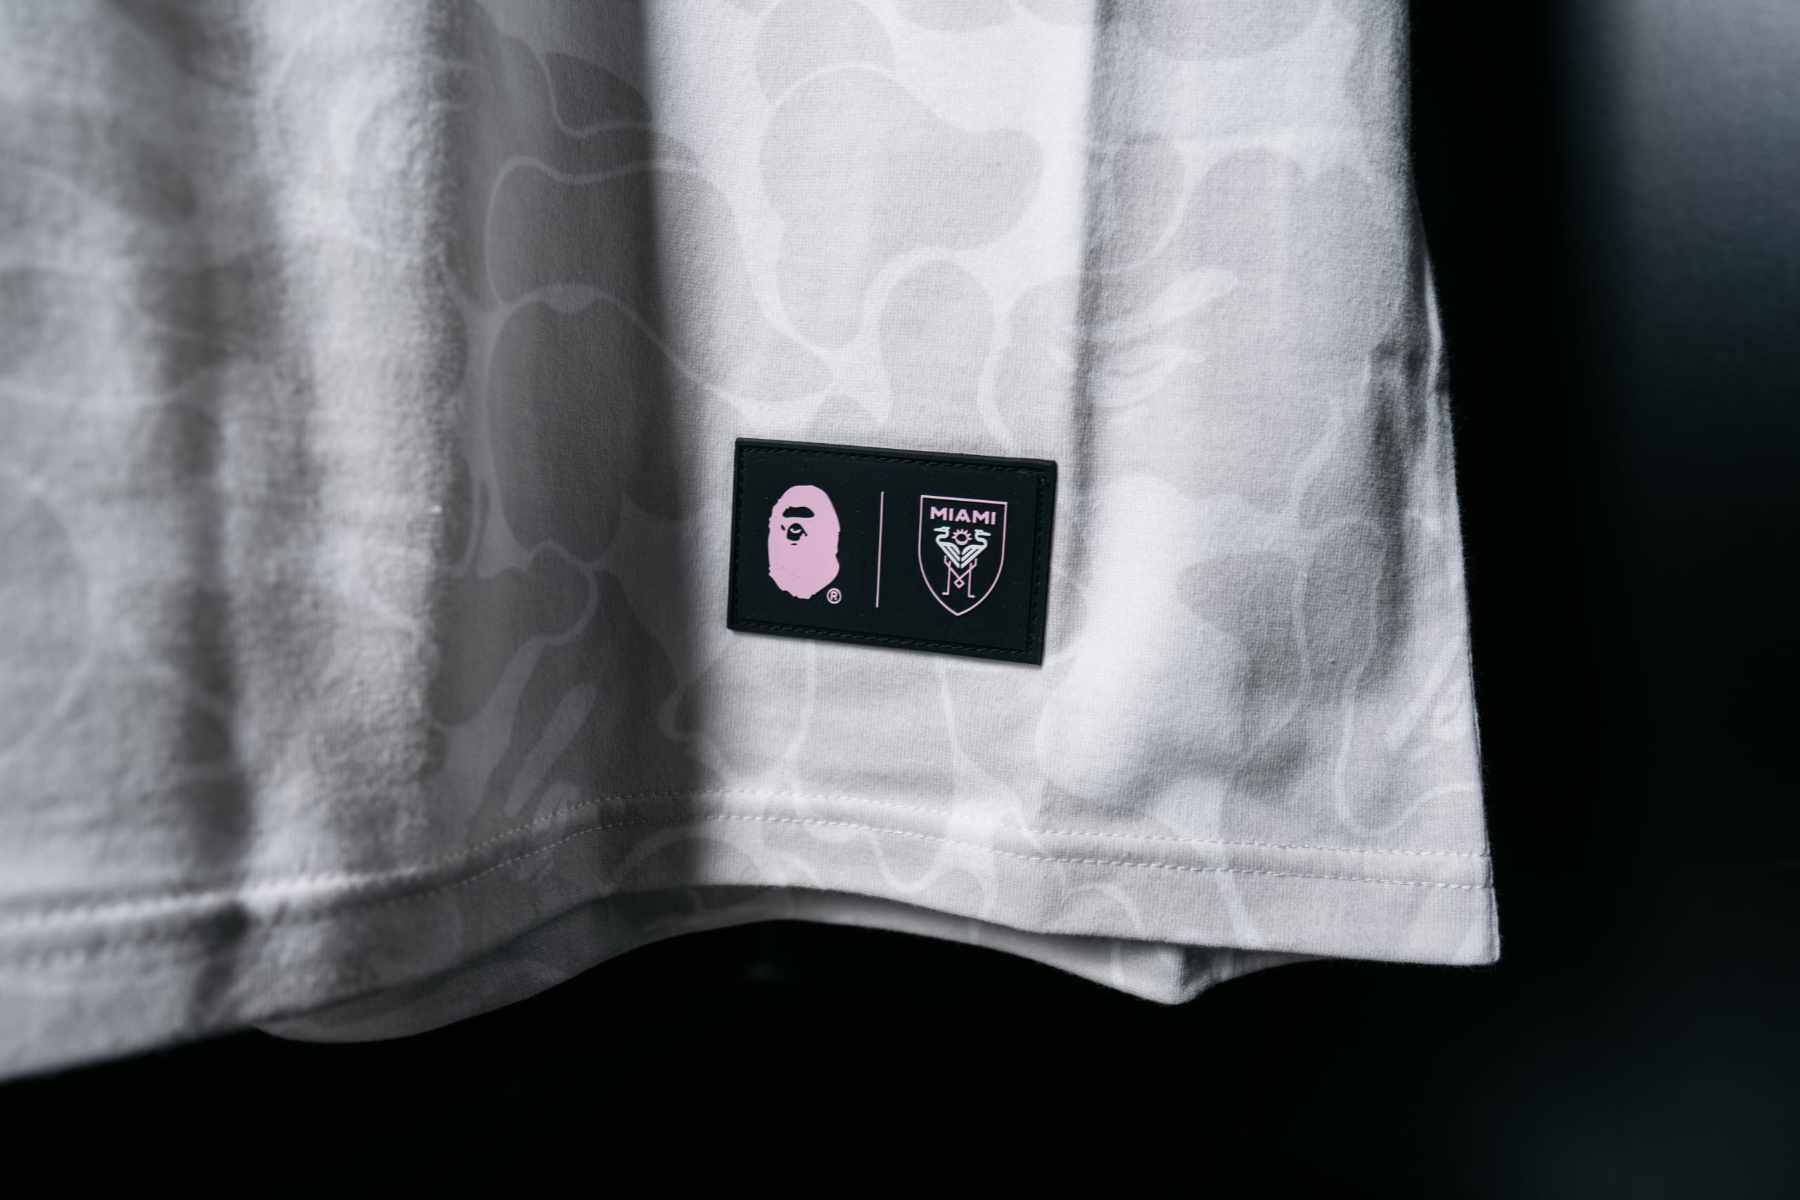 BAPE & Inter Miami's collaborative T-shirt with two logos